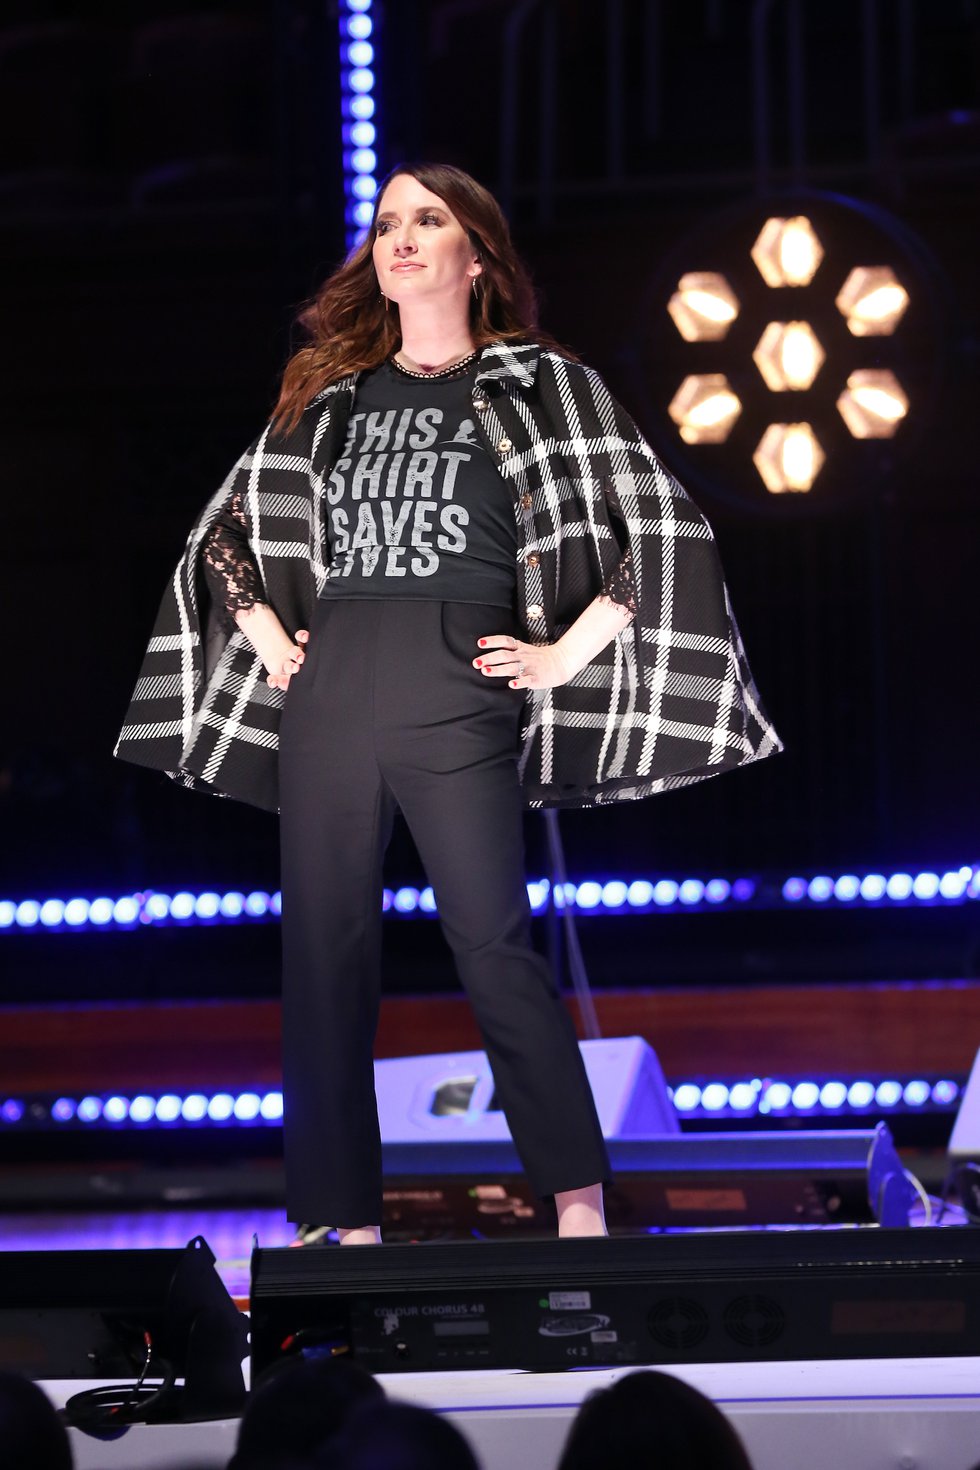 Clea Shearer of the The Home Edit walks the runway at the #ThisShirtSavesLives event.jpg